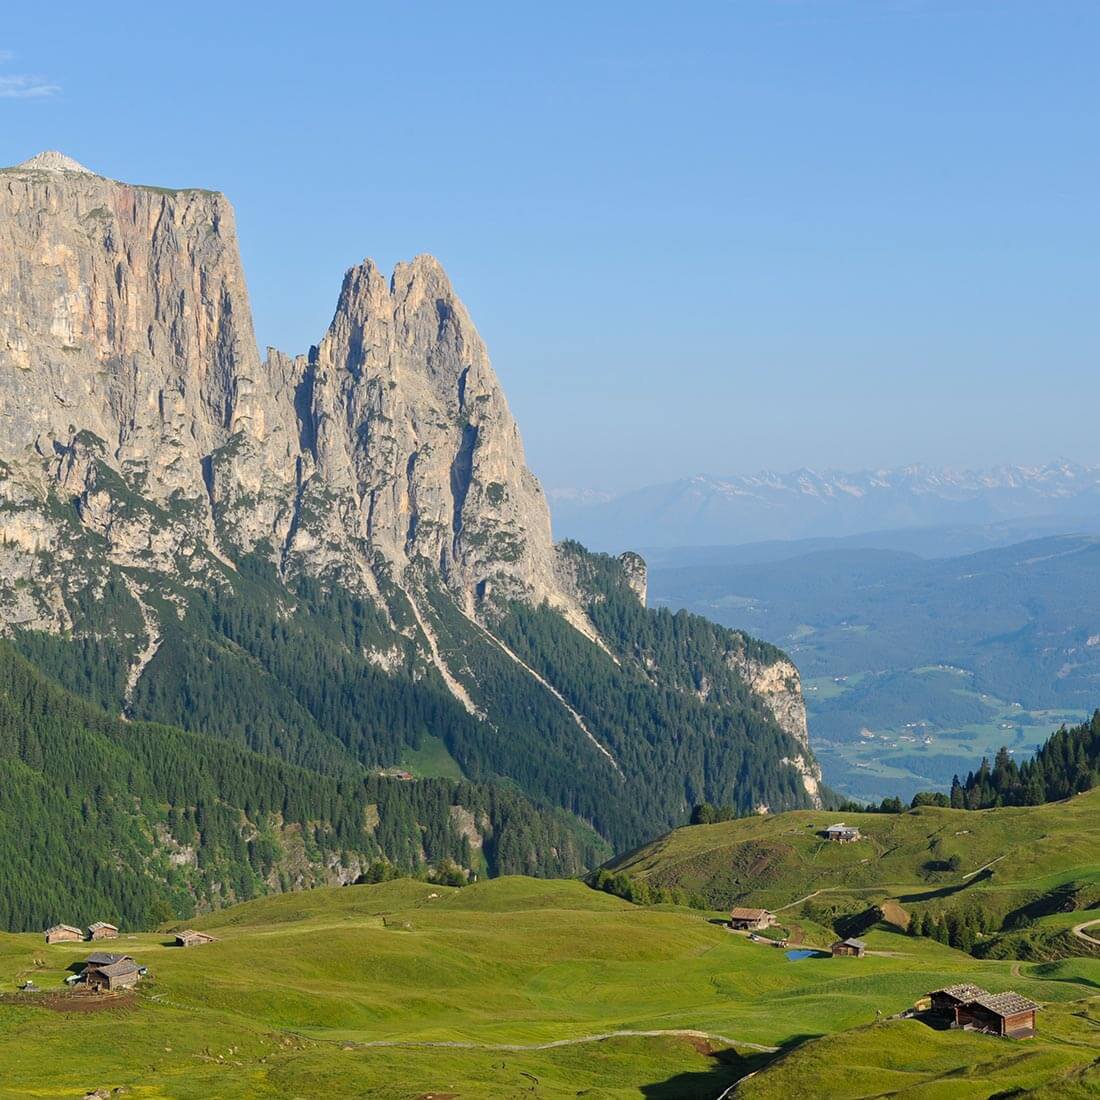 Prackfolerhof or Schlosshof - magnificent mountain scenery of the Dolomites